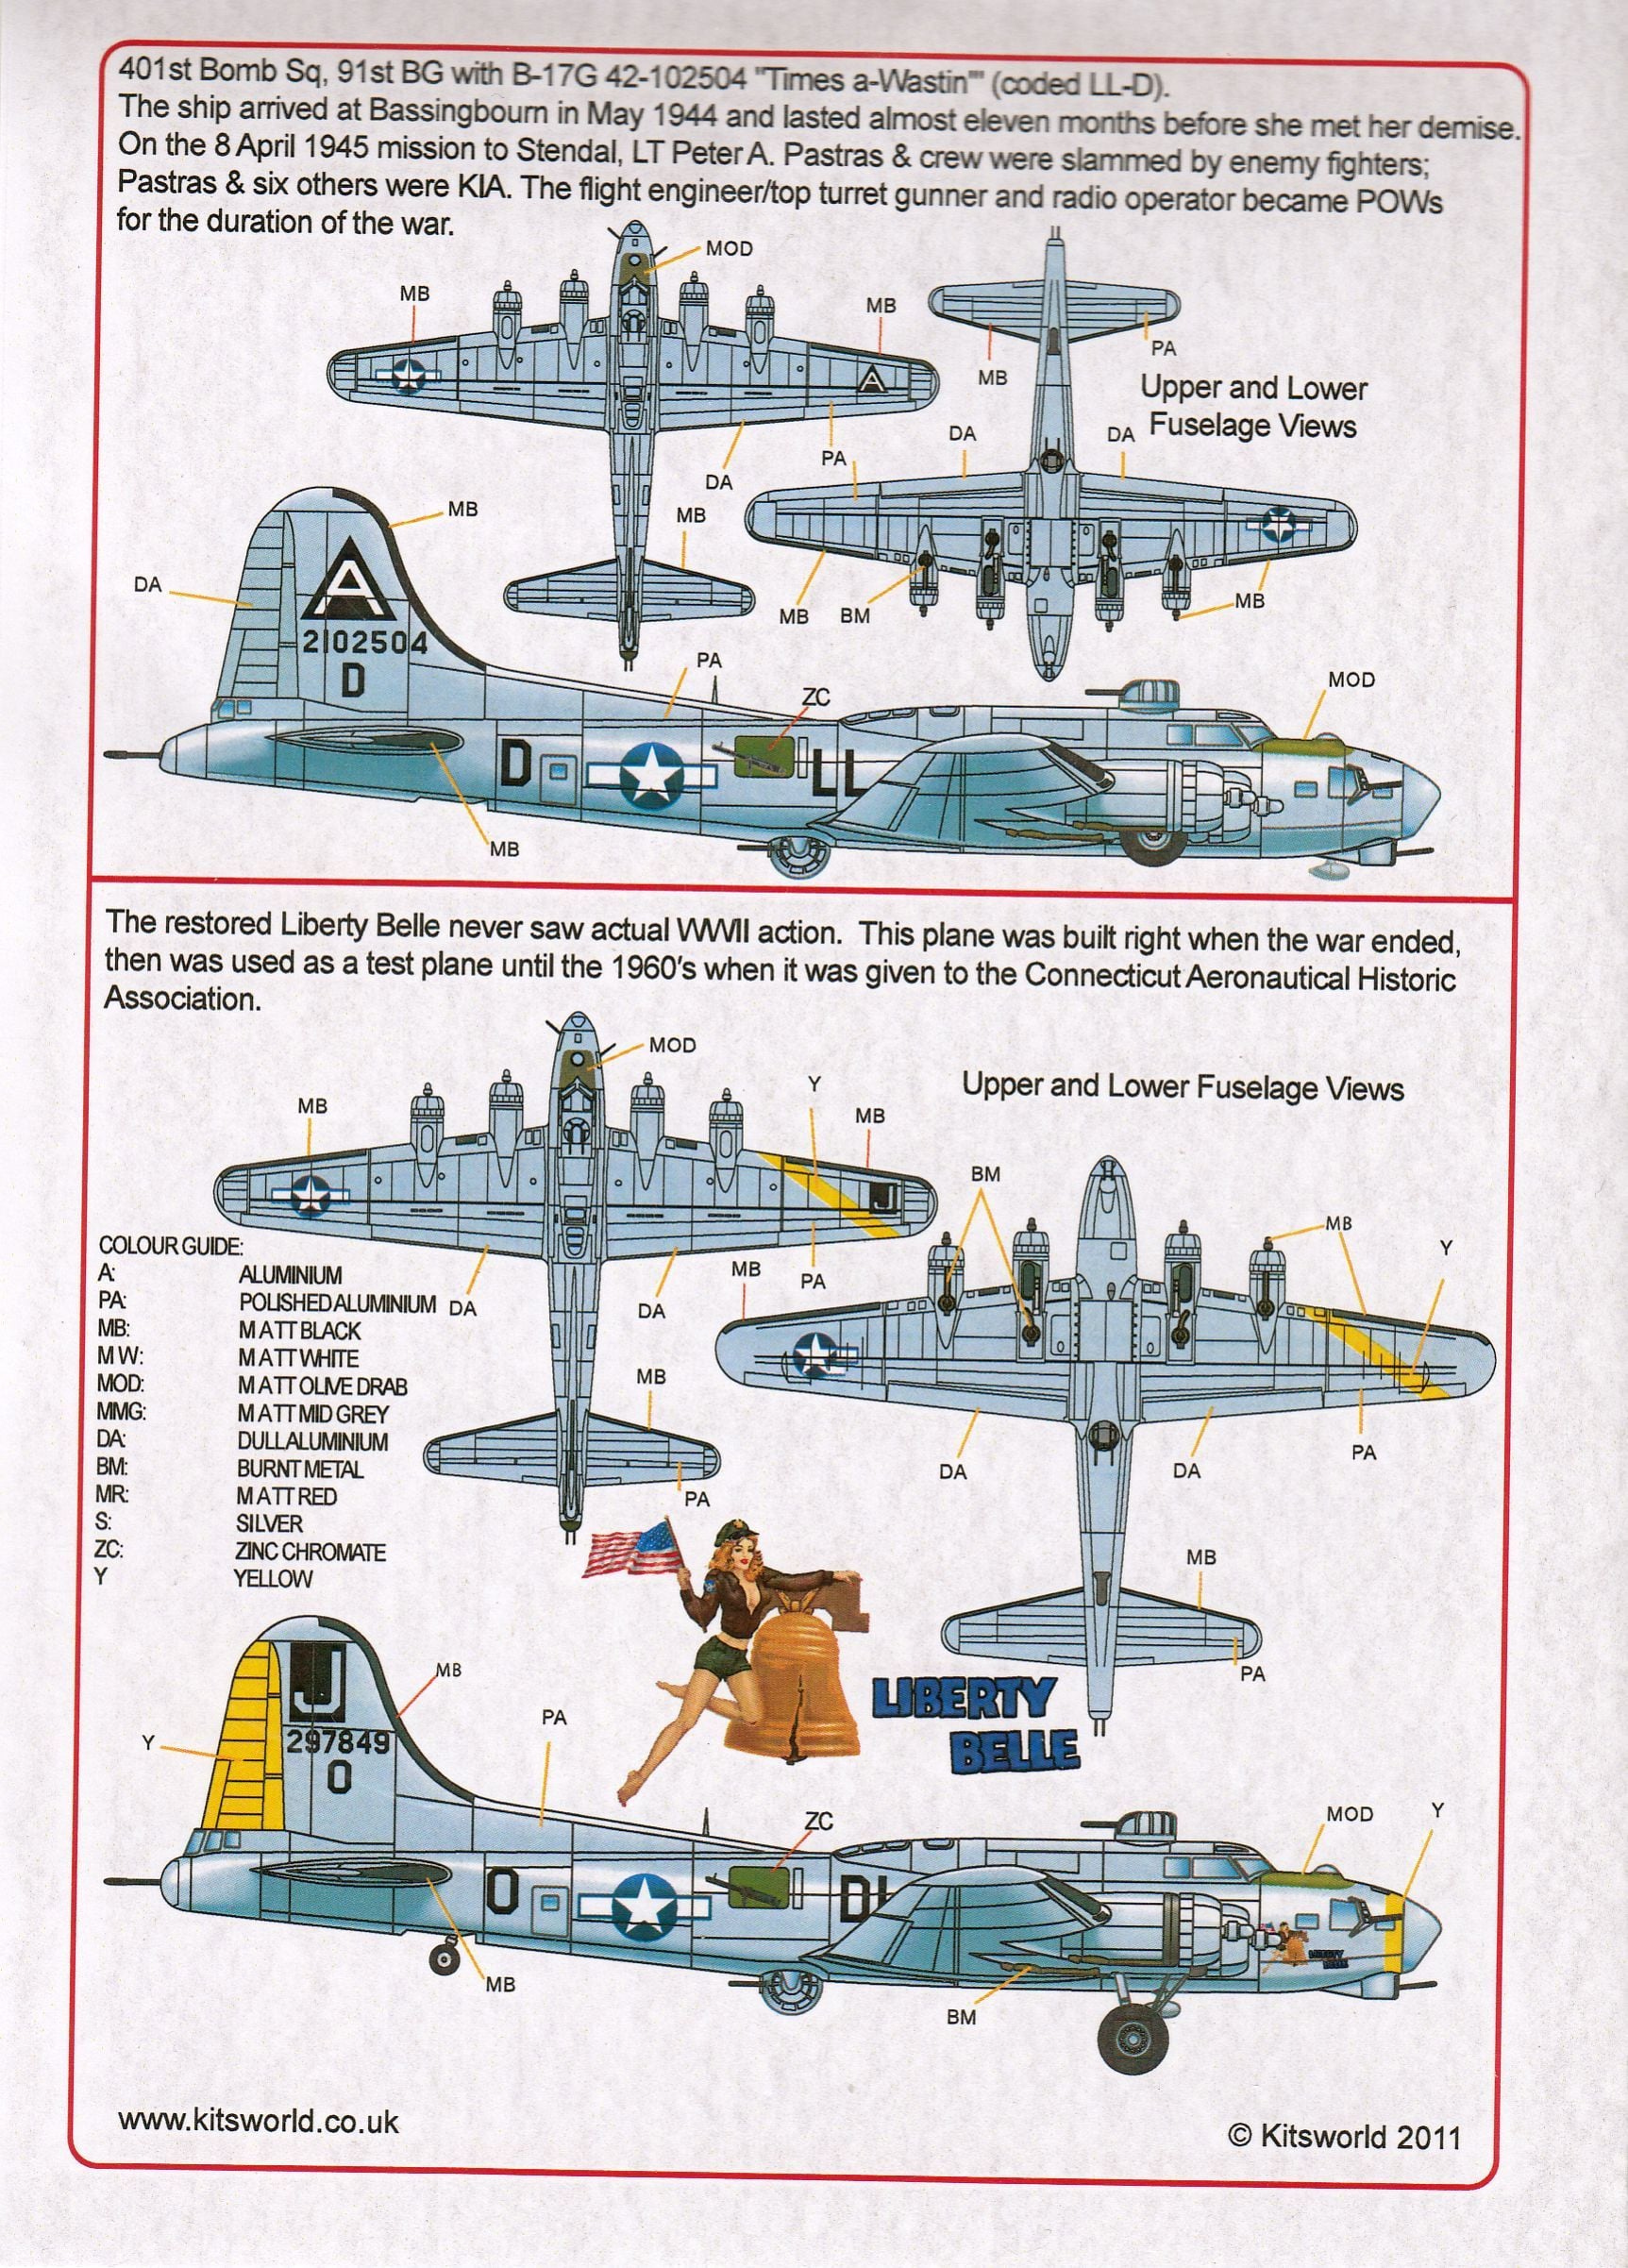 Kits-World KW148053 1/48 B17G Flying Fortress 'Liberty Belle' Model Decals - SGS Model Store